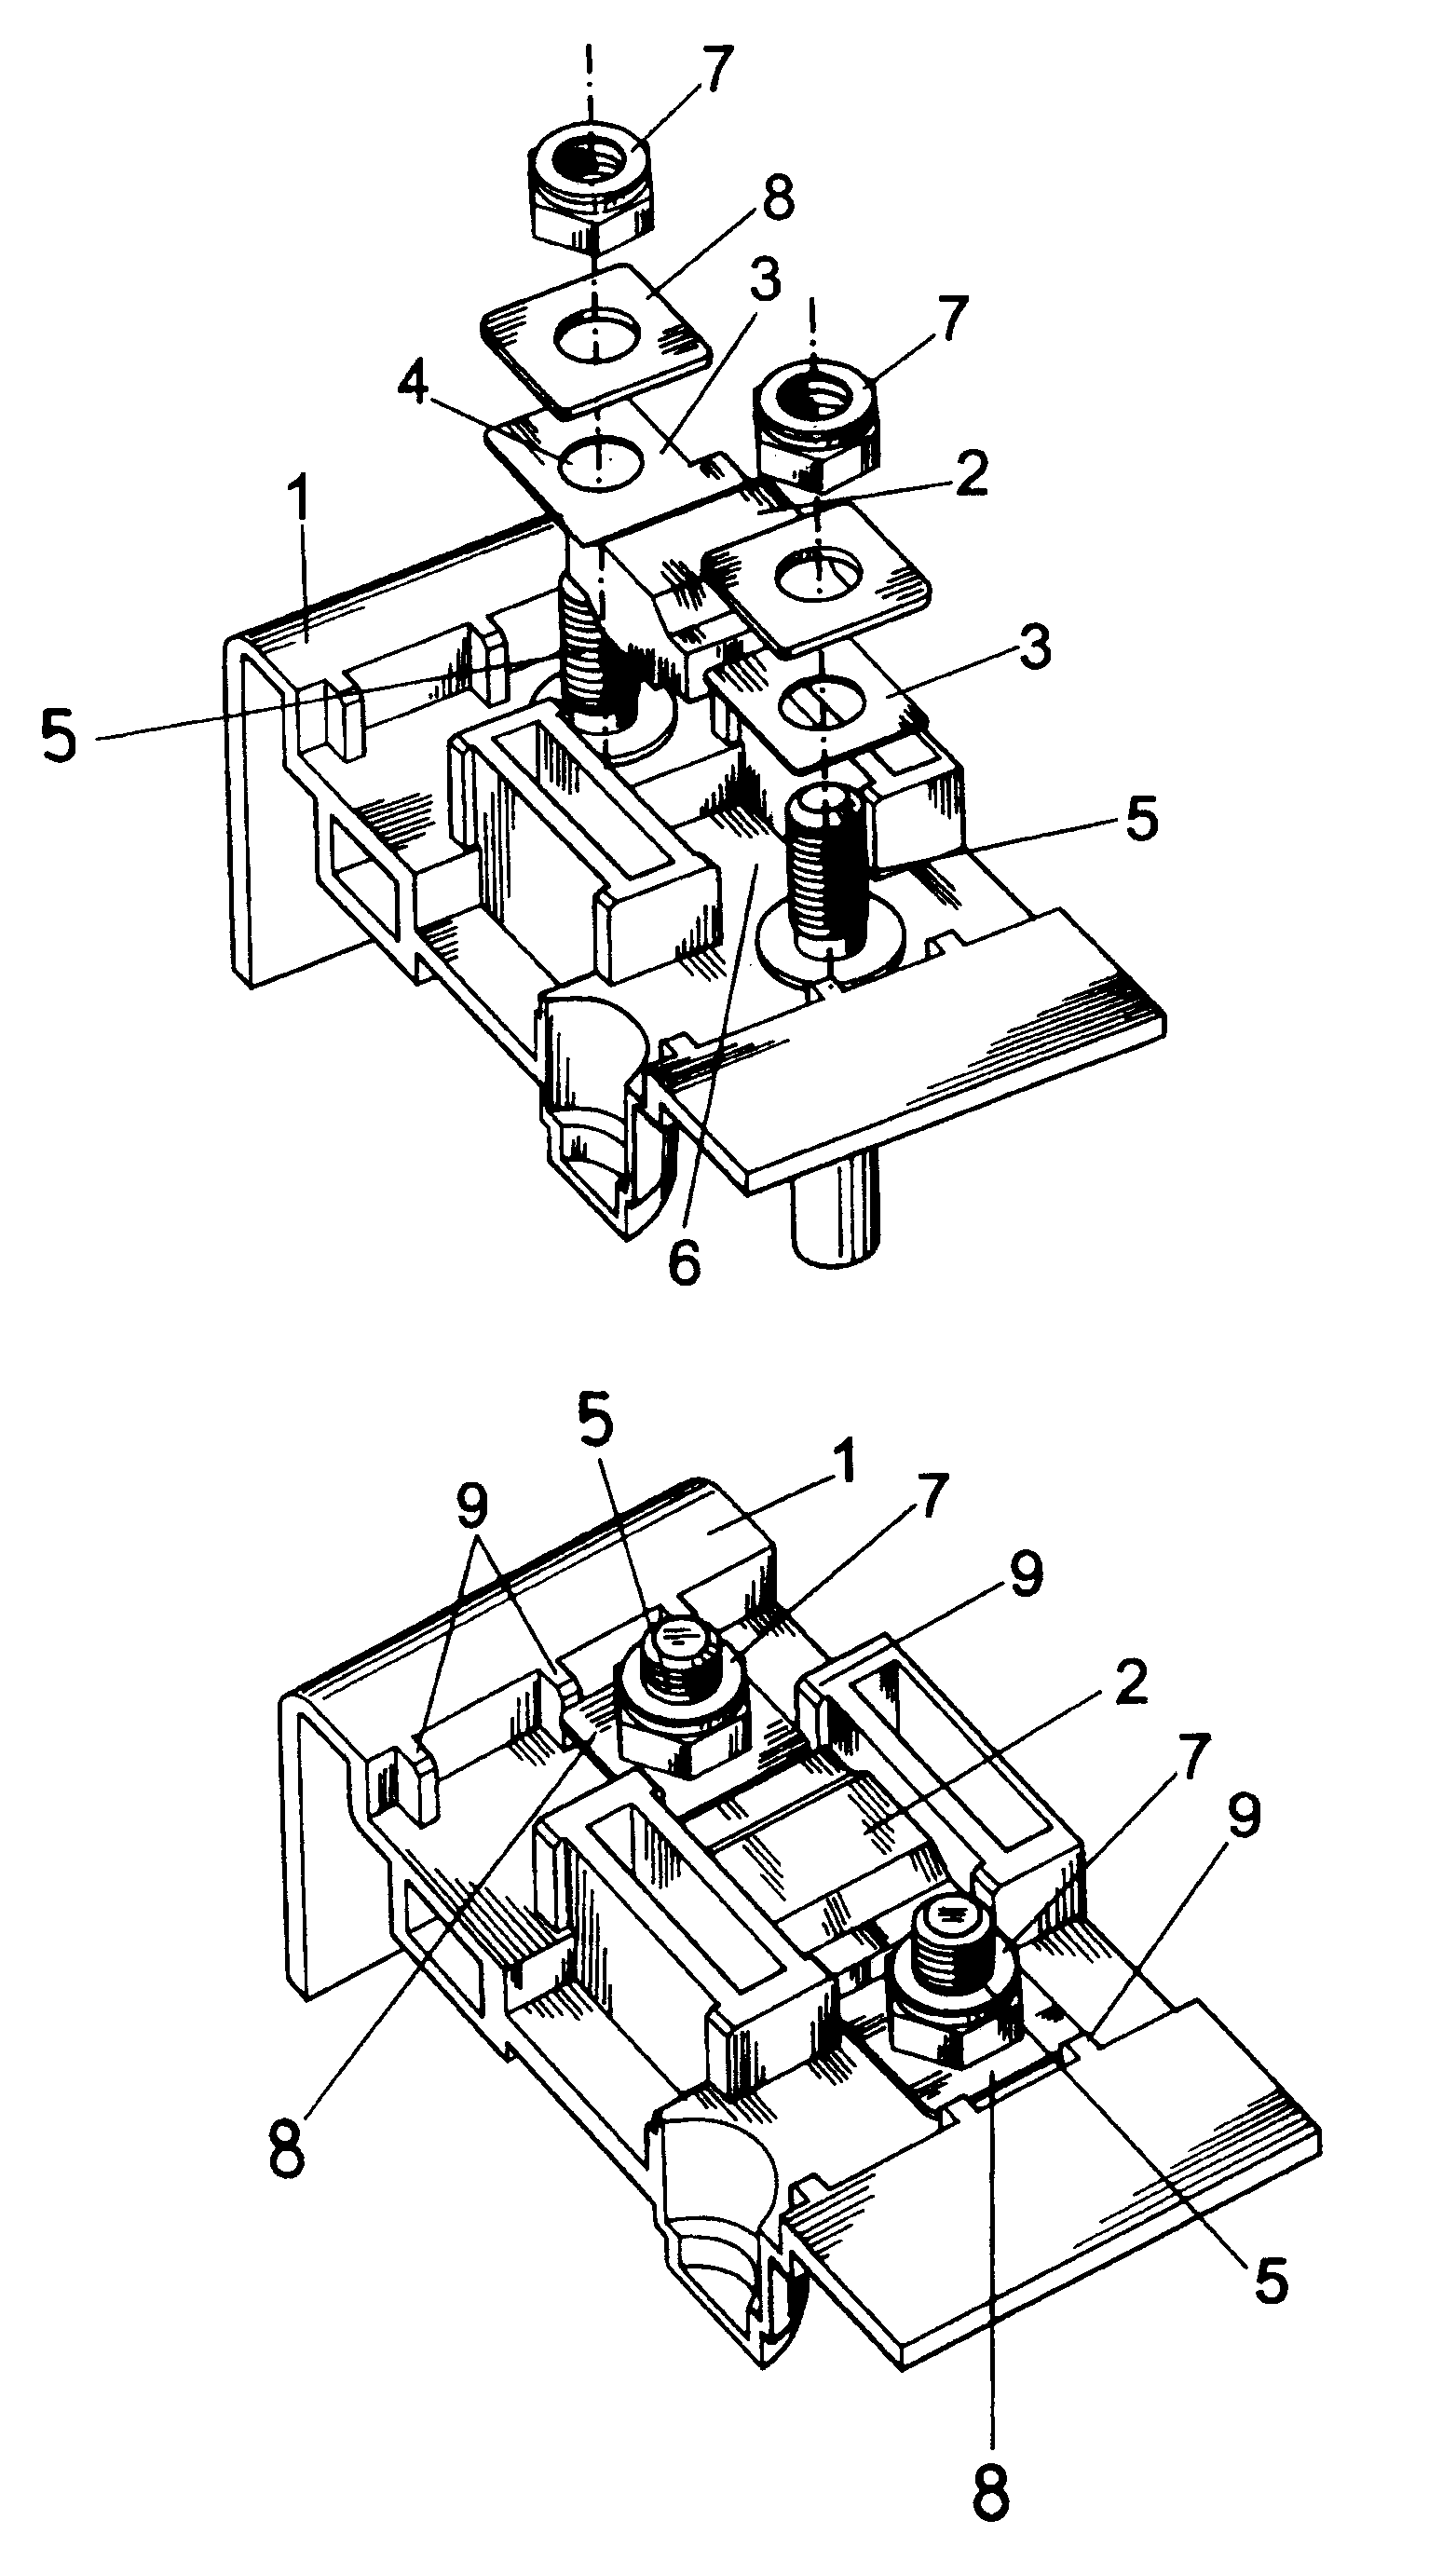 Mounting device for laminated fuses